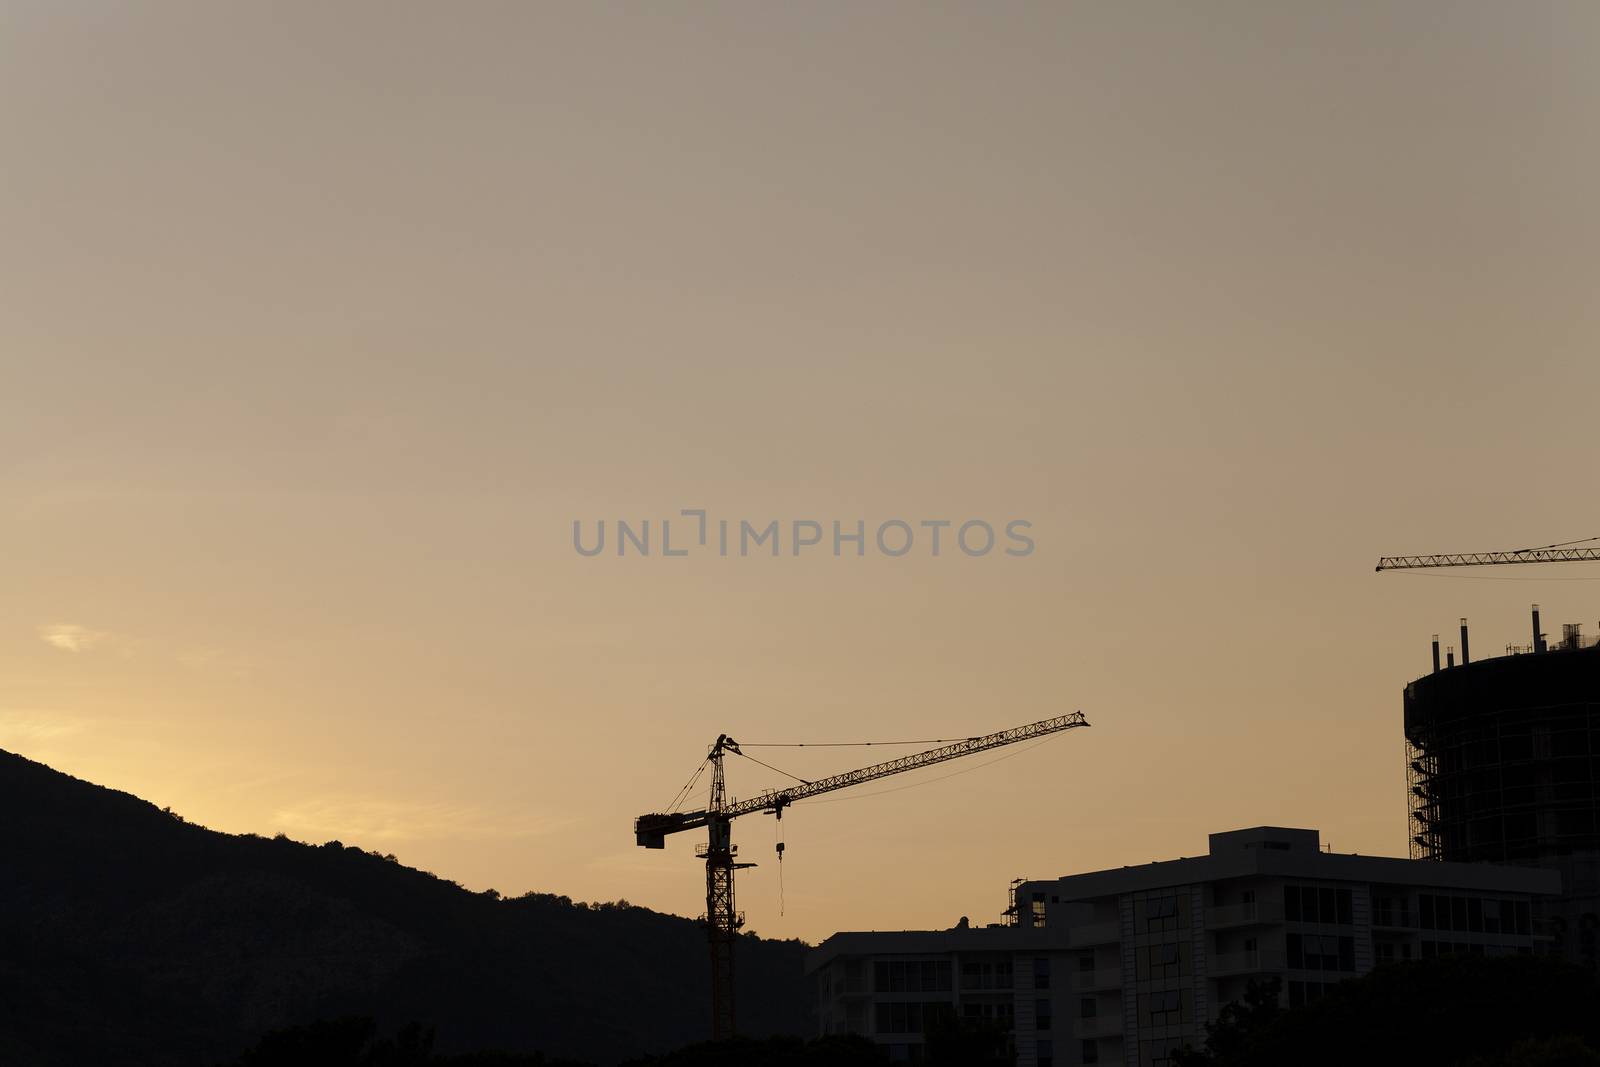   the photograph shows two construction cranes in housing starts. Sunset. In the background mountains.